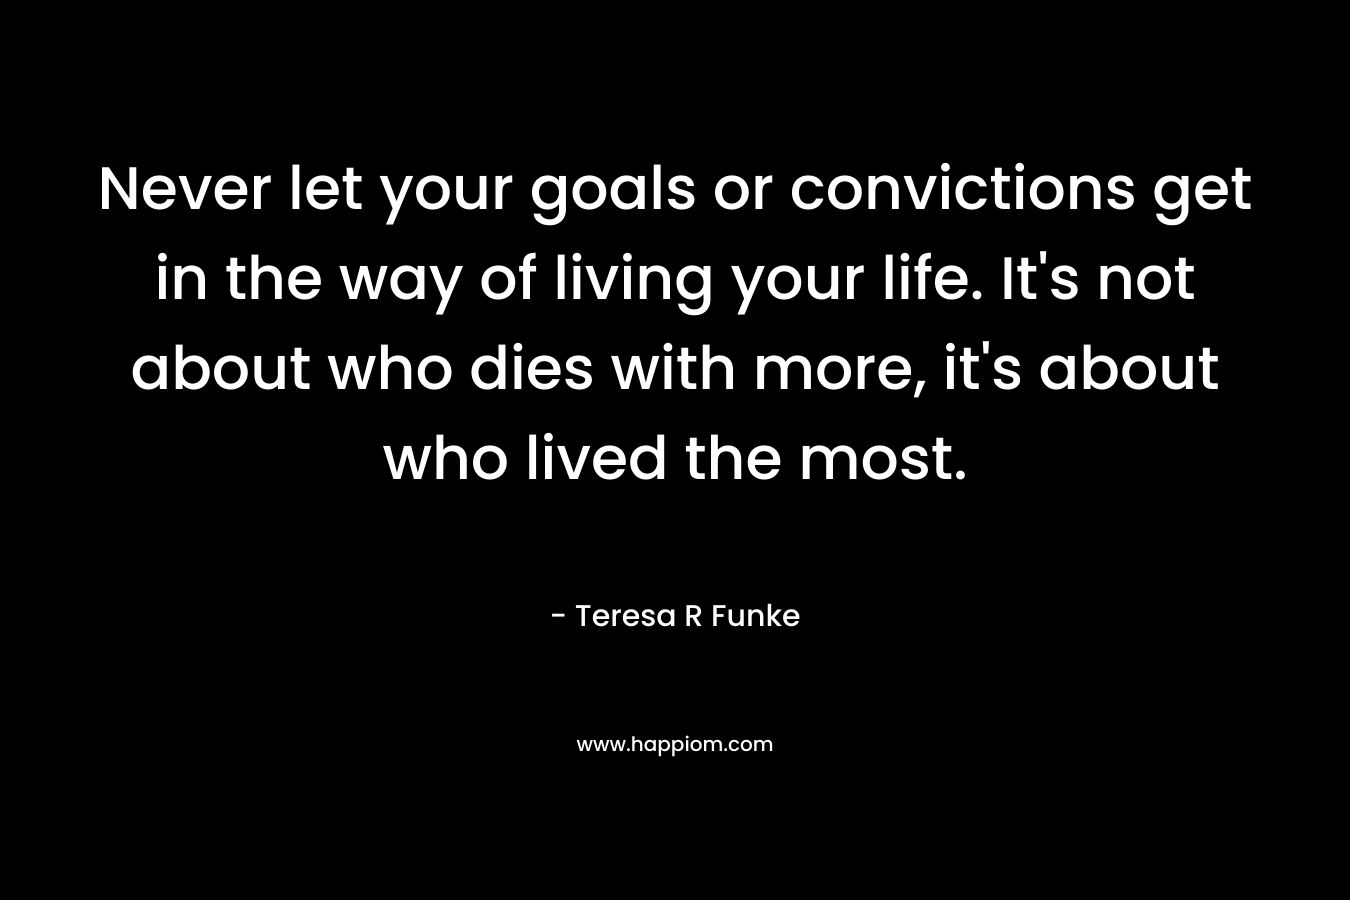 Never let your goals or convictions get in the way of living your life. It’s not about who dies with more, it’s about who lived the most. – Teresa R Funke